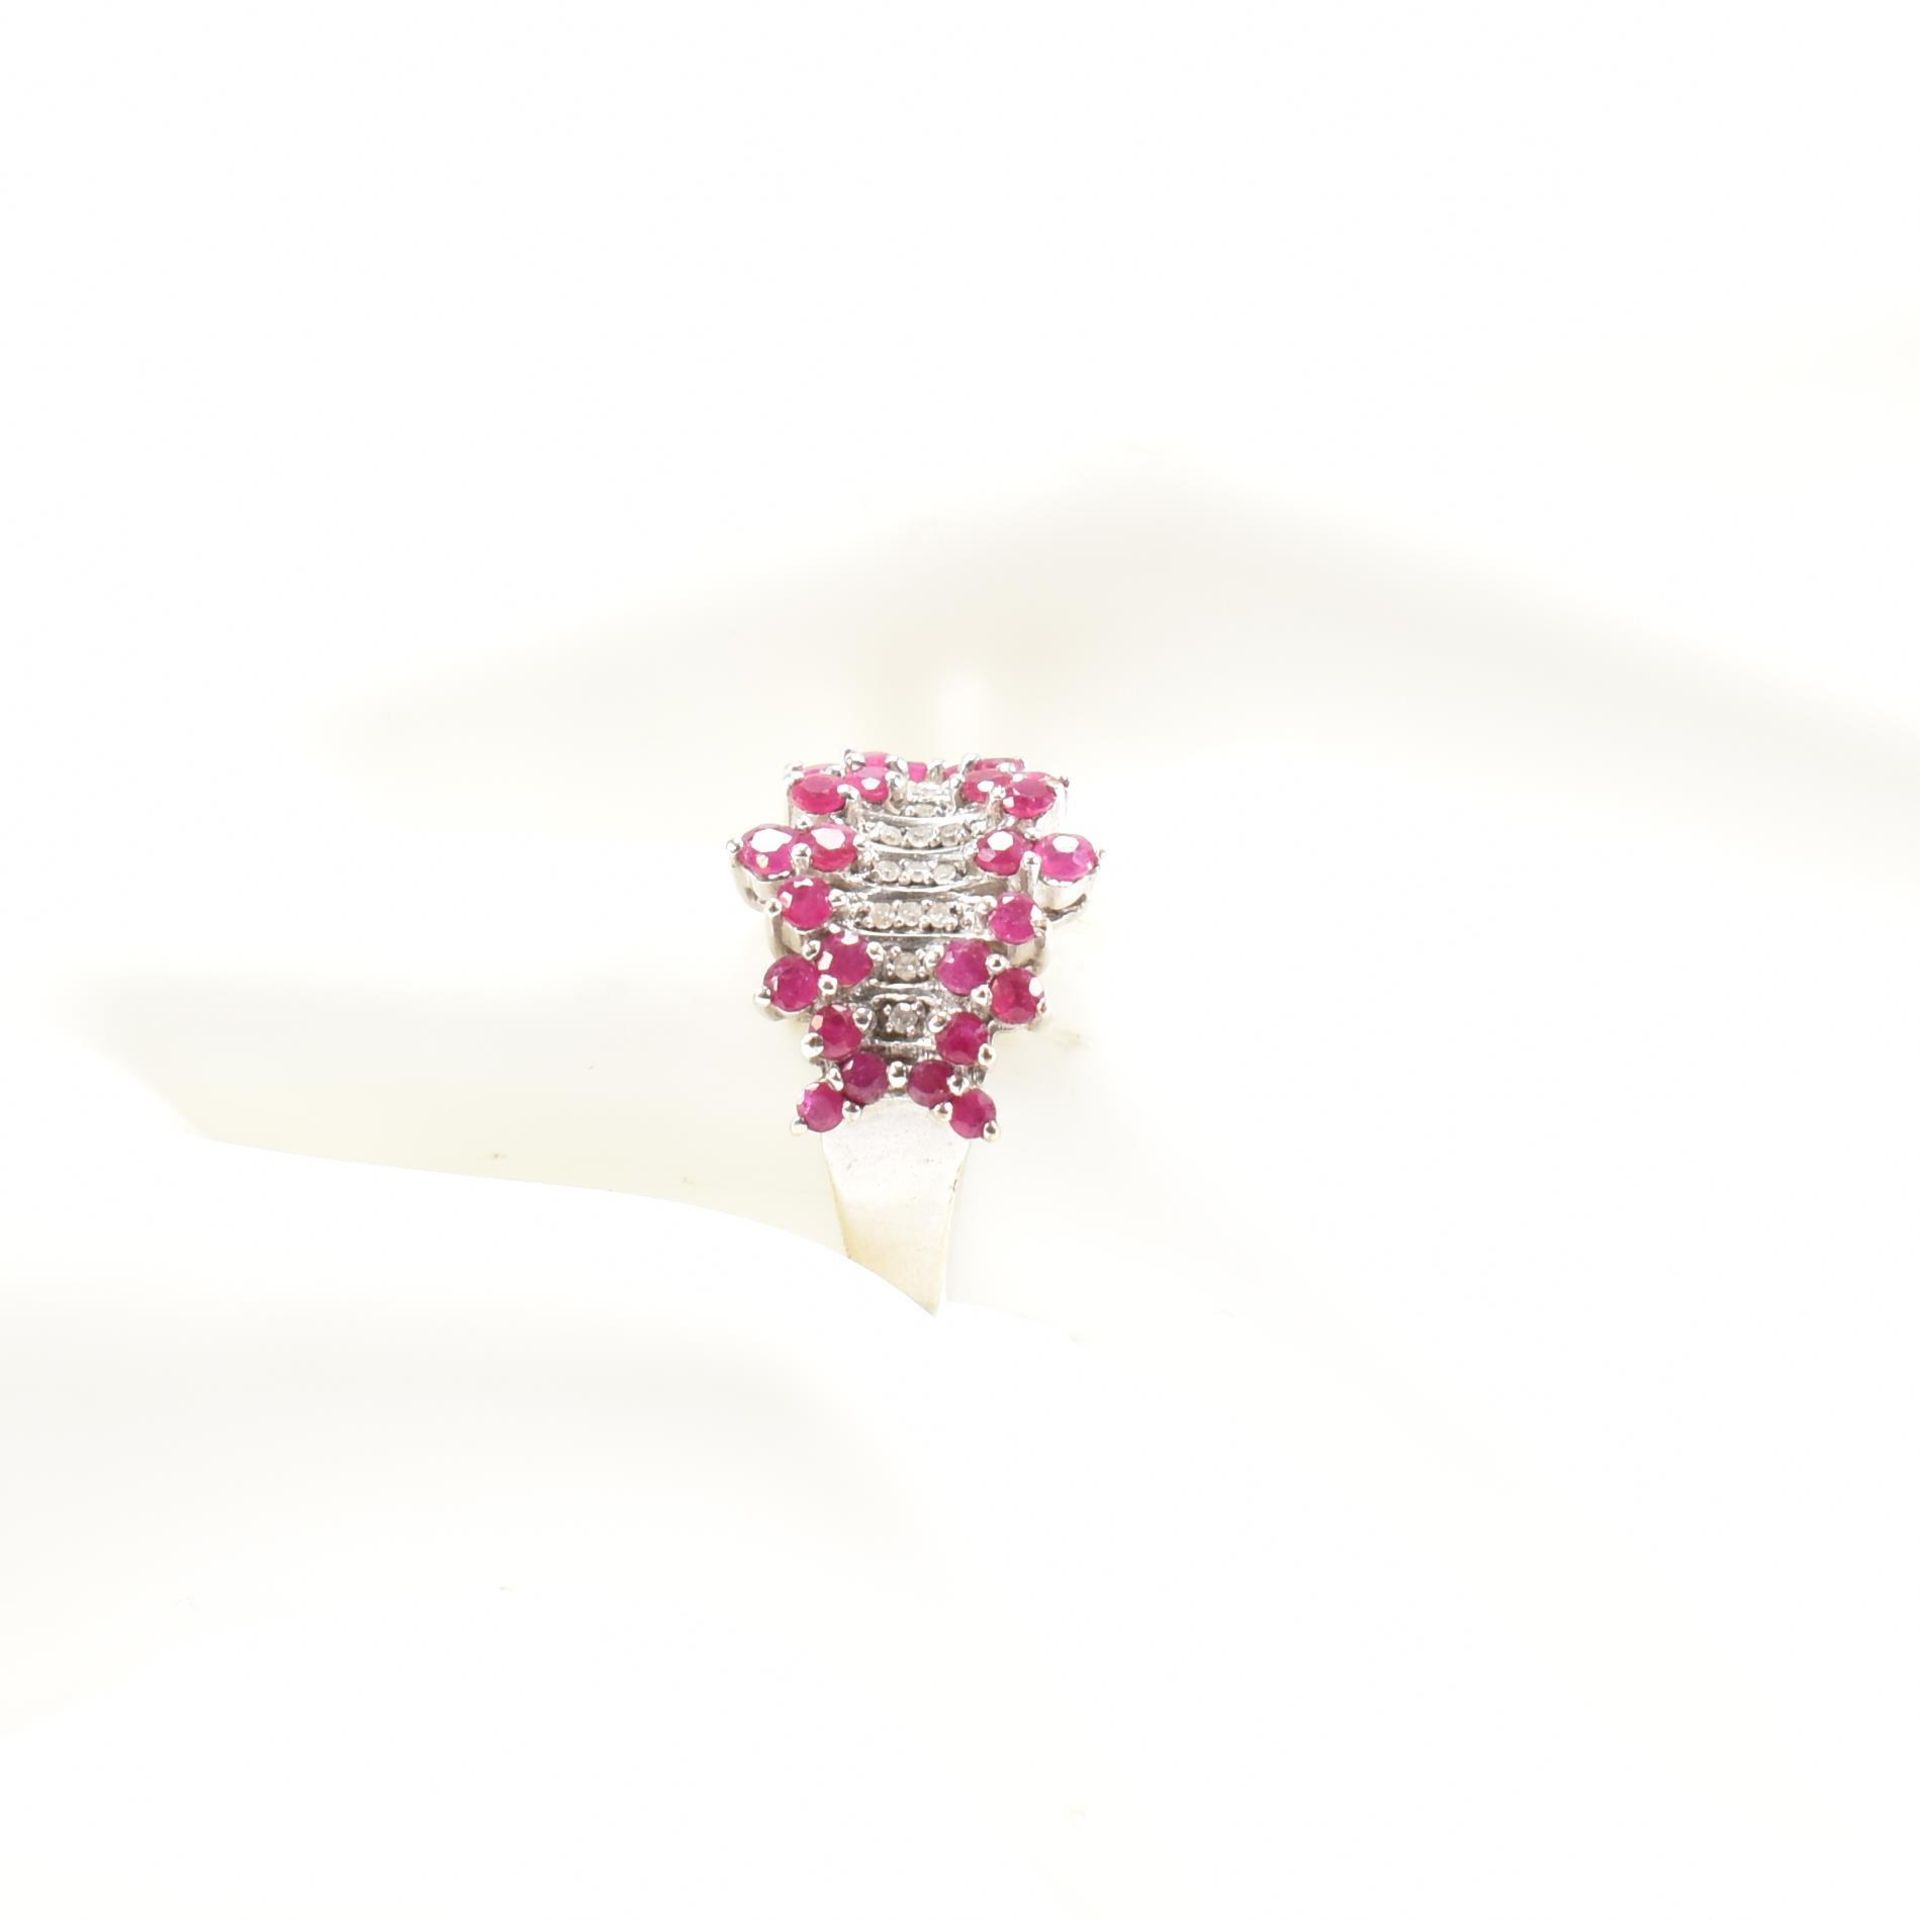 HALLMARKED 9CT WHITE GOLD COMPOSITE RUBY & DIAMOND RING - Image 9 of 9